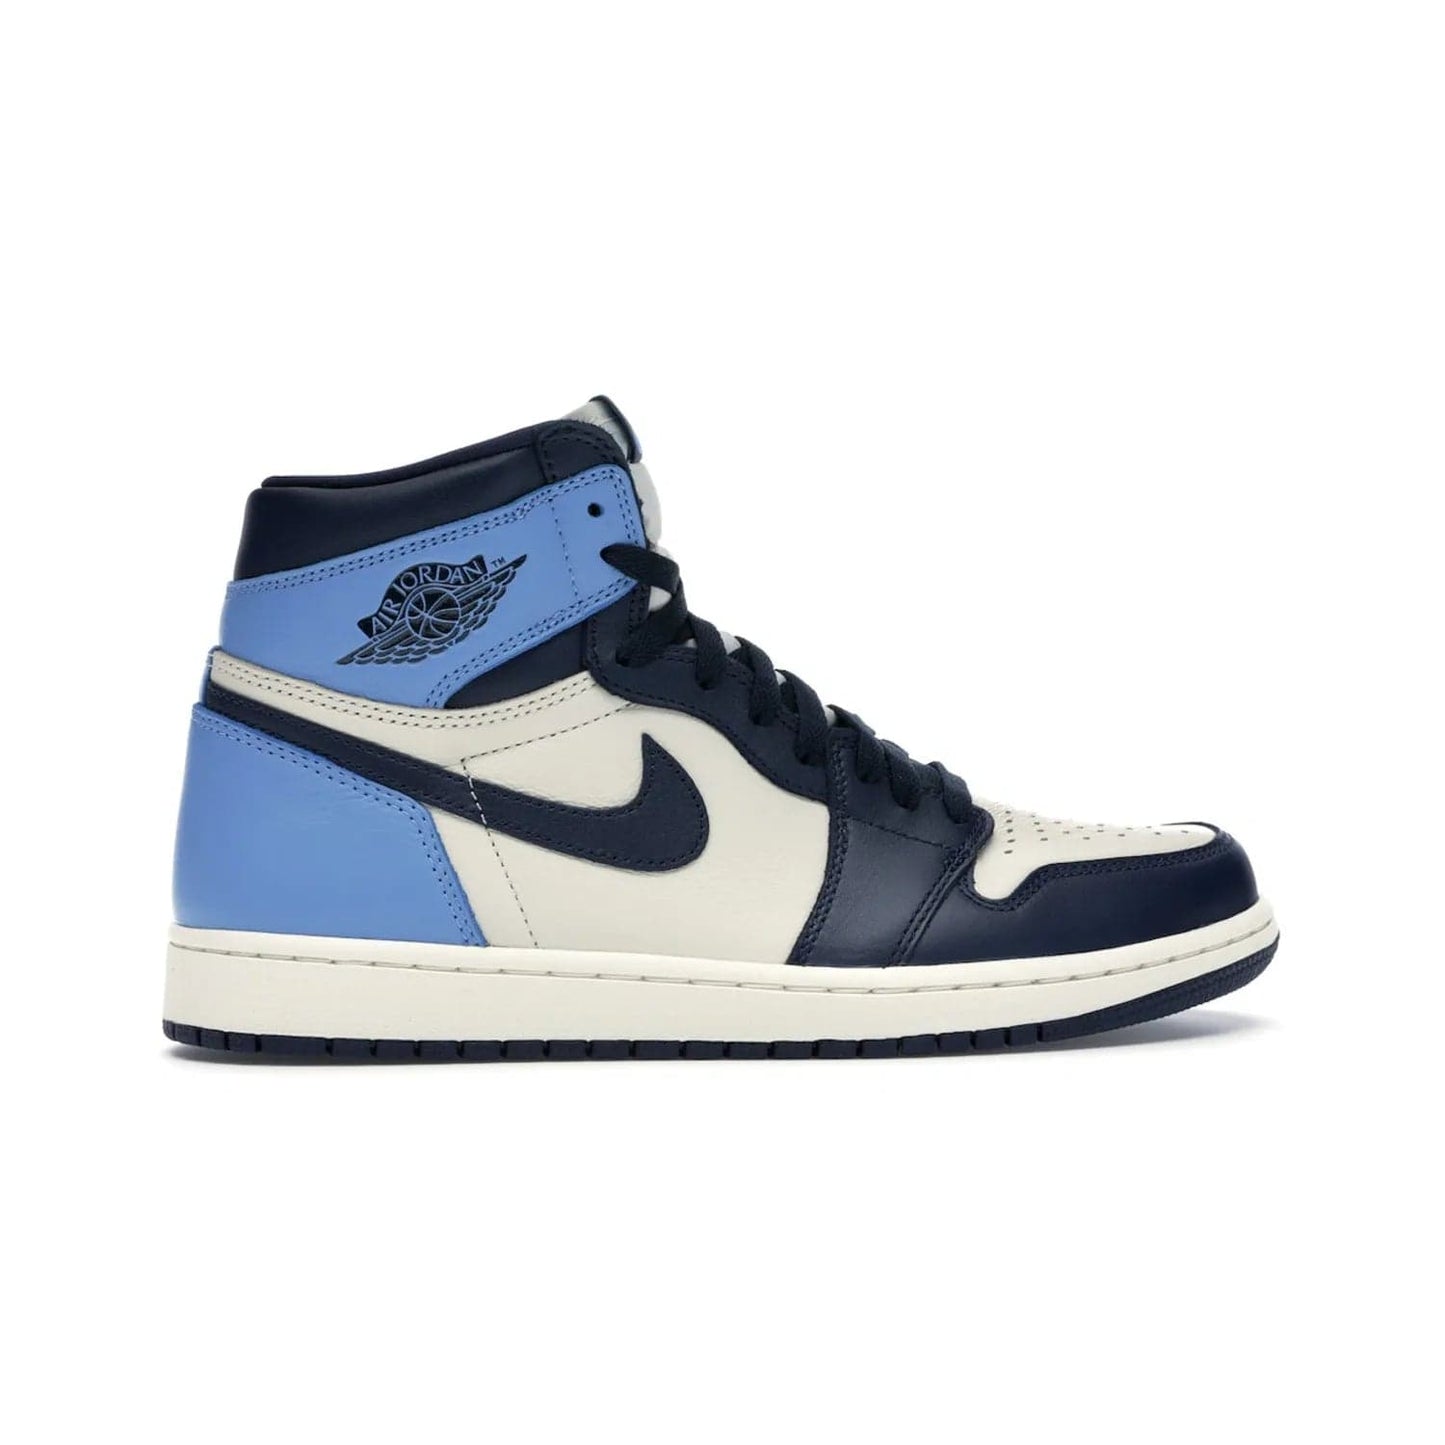 Jordan 1 Retro High Obsidian UNC - Image 36 - Only at www.BallersClubKickz.com - Bring a timeless classic to your wardrobe with the Air Jordan 1 Retro High "Obsidian/University Blue”. A full leather upper combines Obsidian and University Blue detailing for a retro Jordan style. Stitched Jumpman logo pays tribute to UNC. Experience classic style with a timeless sneaker.